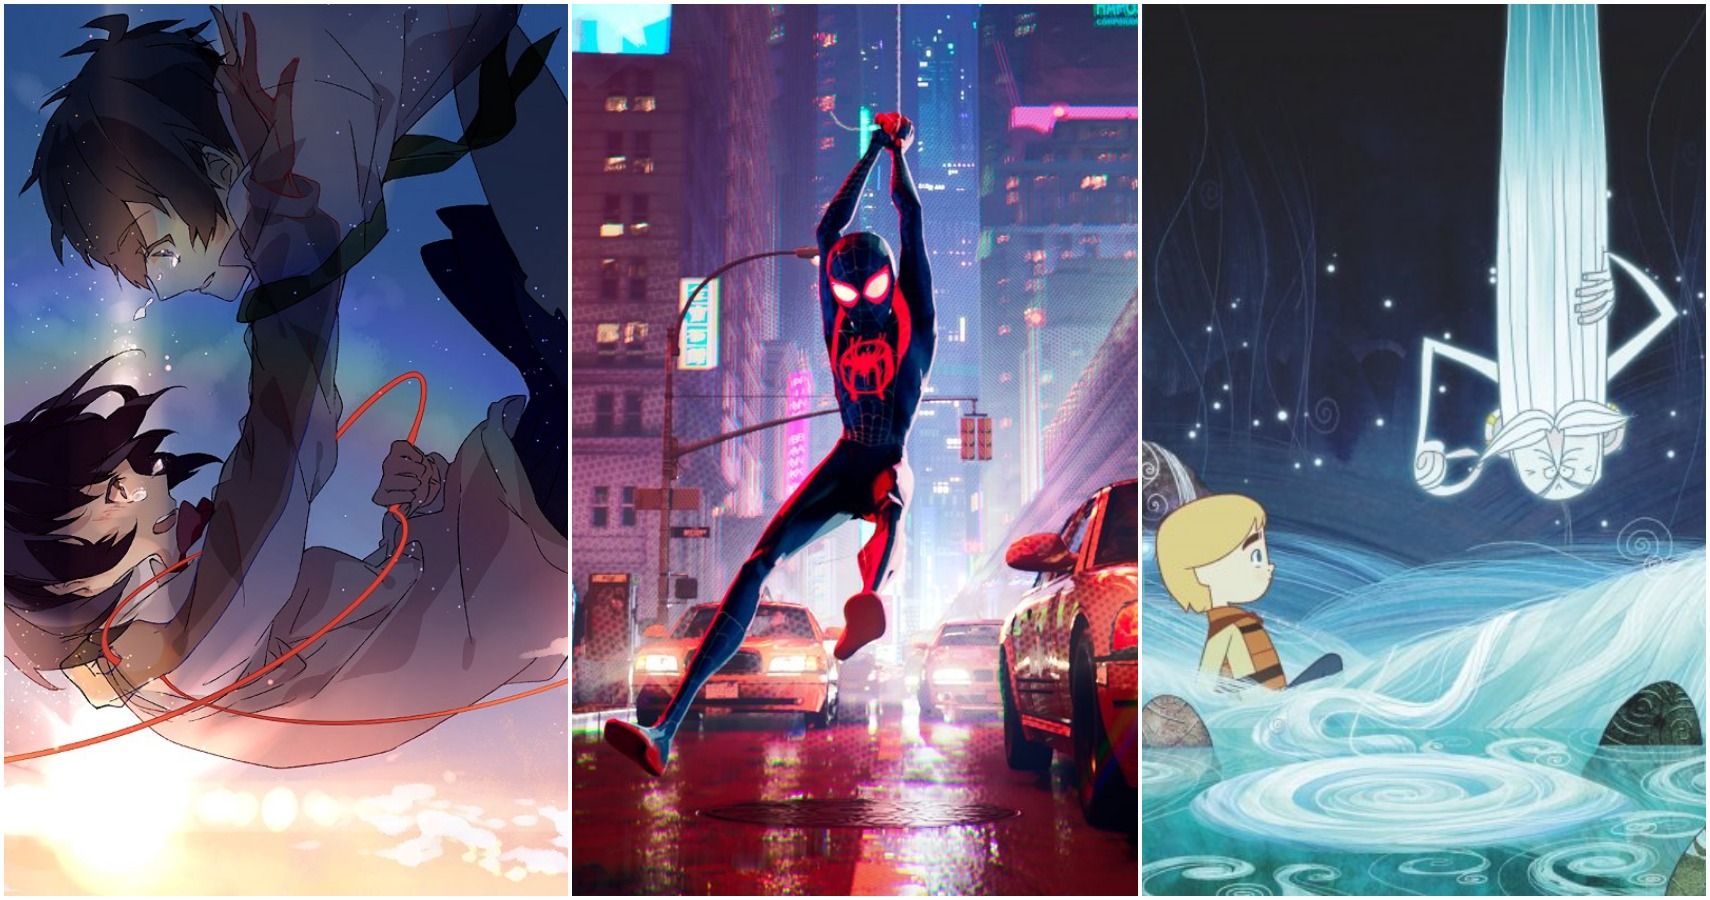 The 10 Best 2010s Animated Movies Not By Disney Or Pixar (According to IMDb)